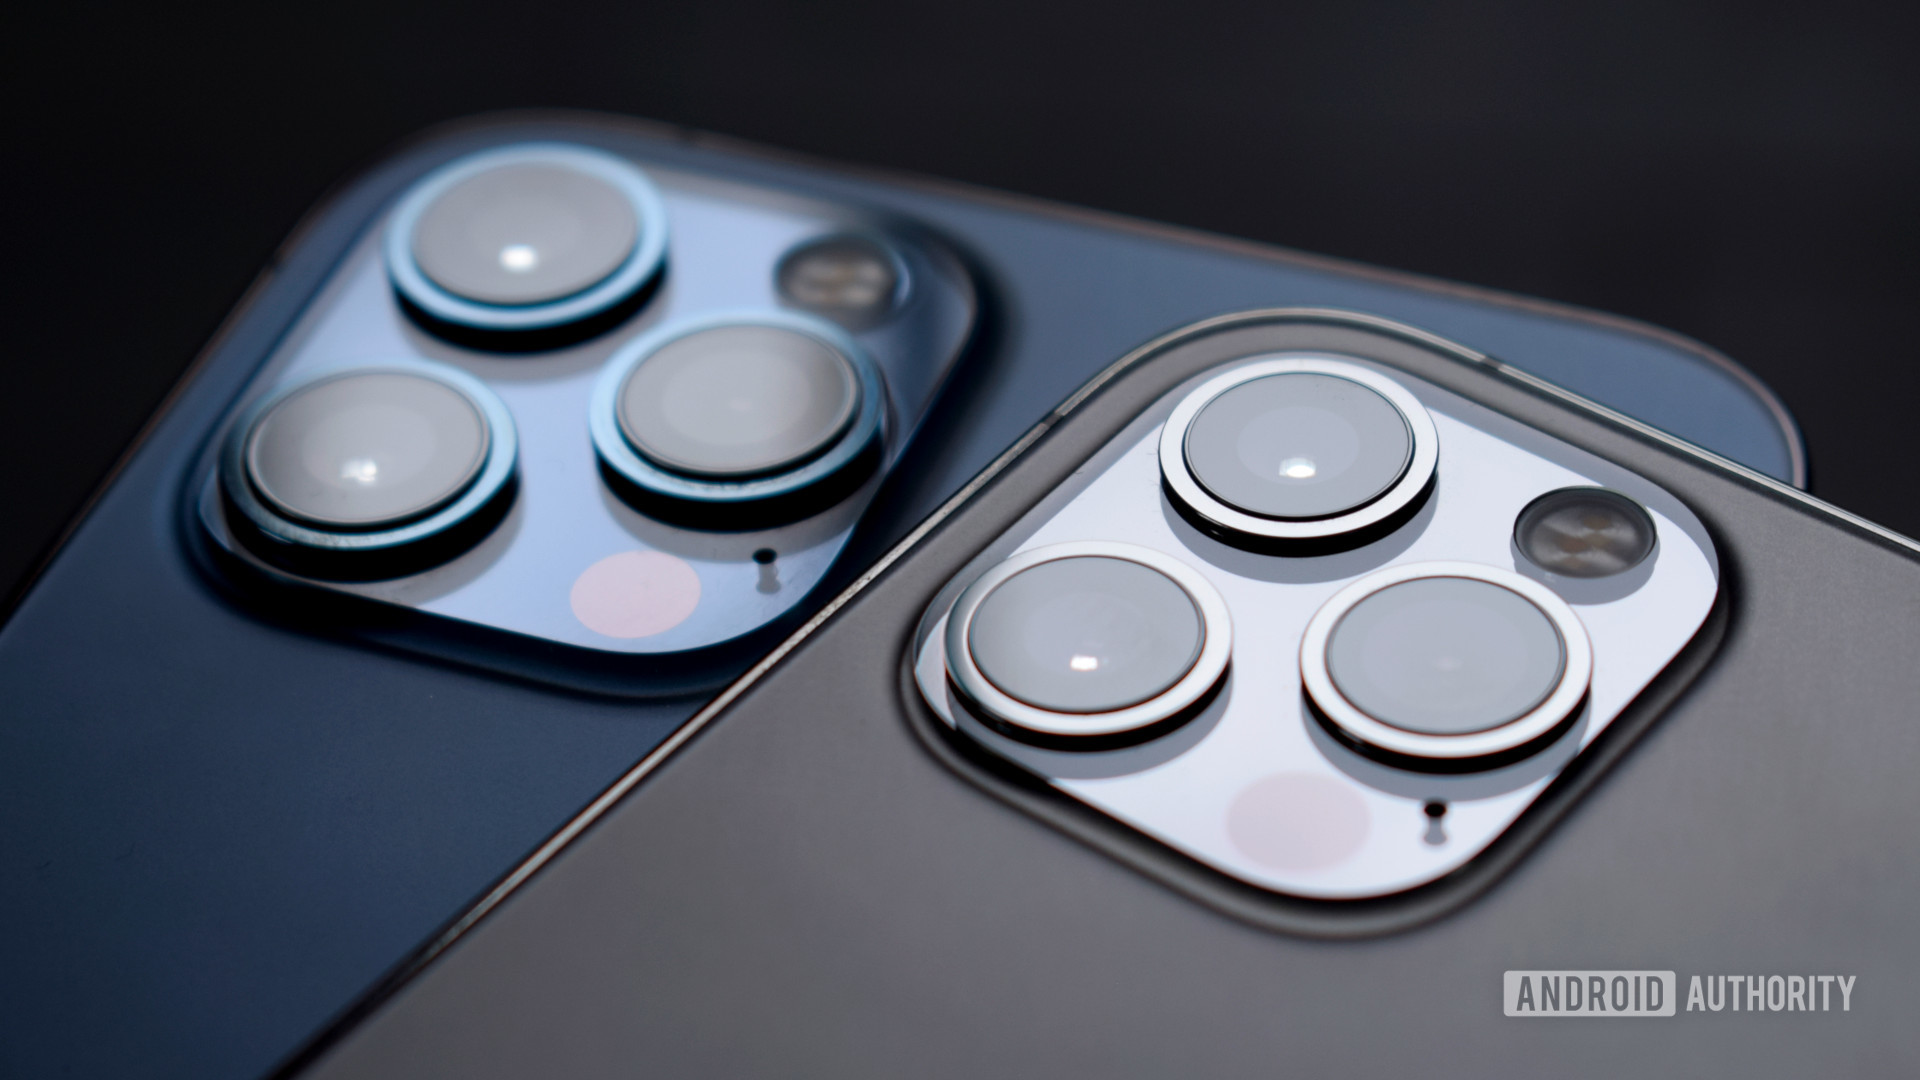 Why iPhone 12 Pro Max's camera is so exciting to this pro